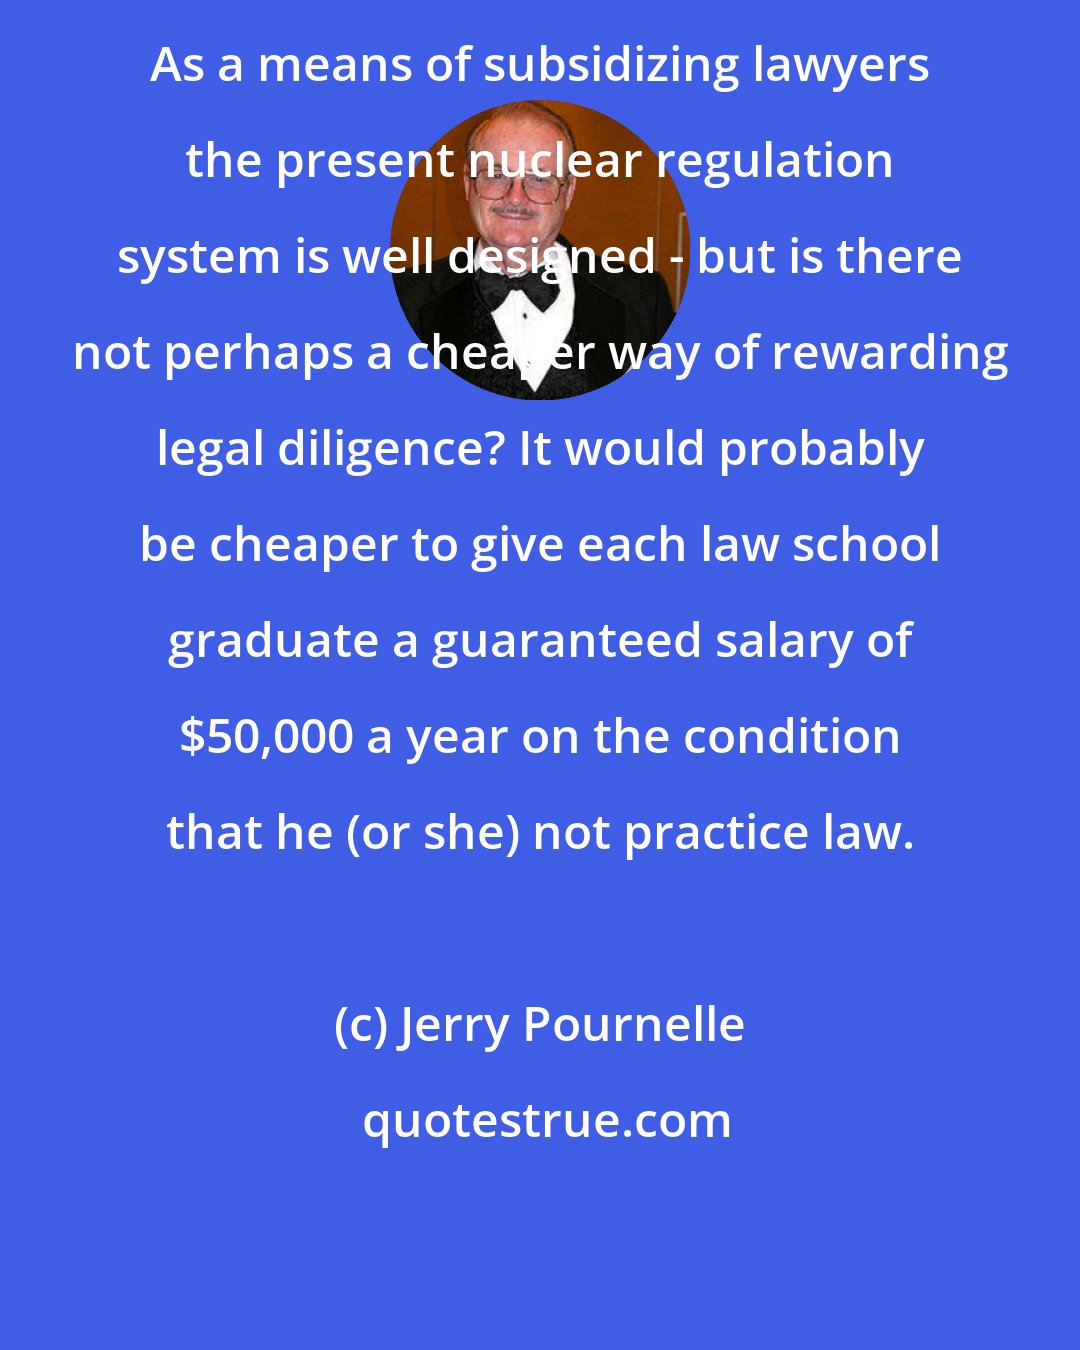 Jerry Pournelle: As a means of subsidizing lawyers the present nuclear regulation system is well designed - but is there not perhaps a cheaper way of rewarding legal diligence? It would probably be cheaper to give each law school graduate a guaranteed salary of $50,000 a year on the condition that he (or she) not practice law.